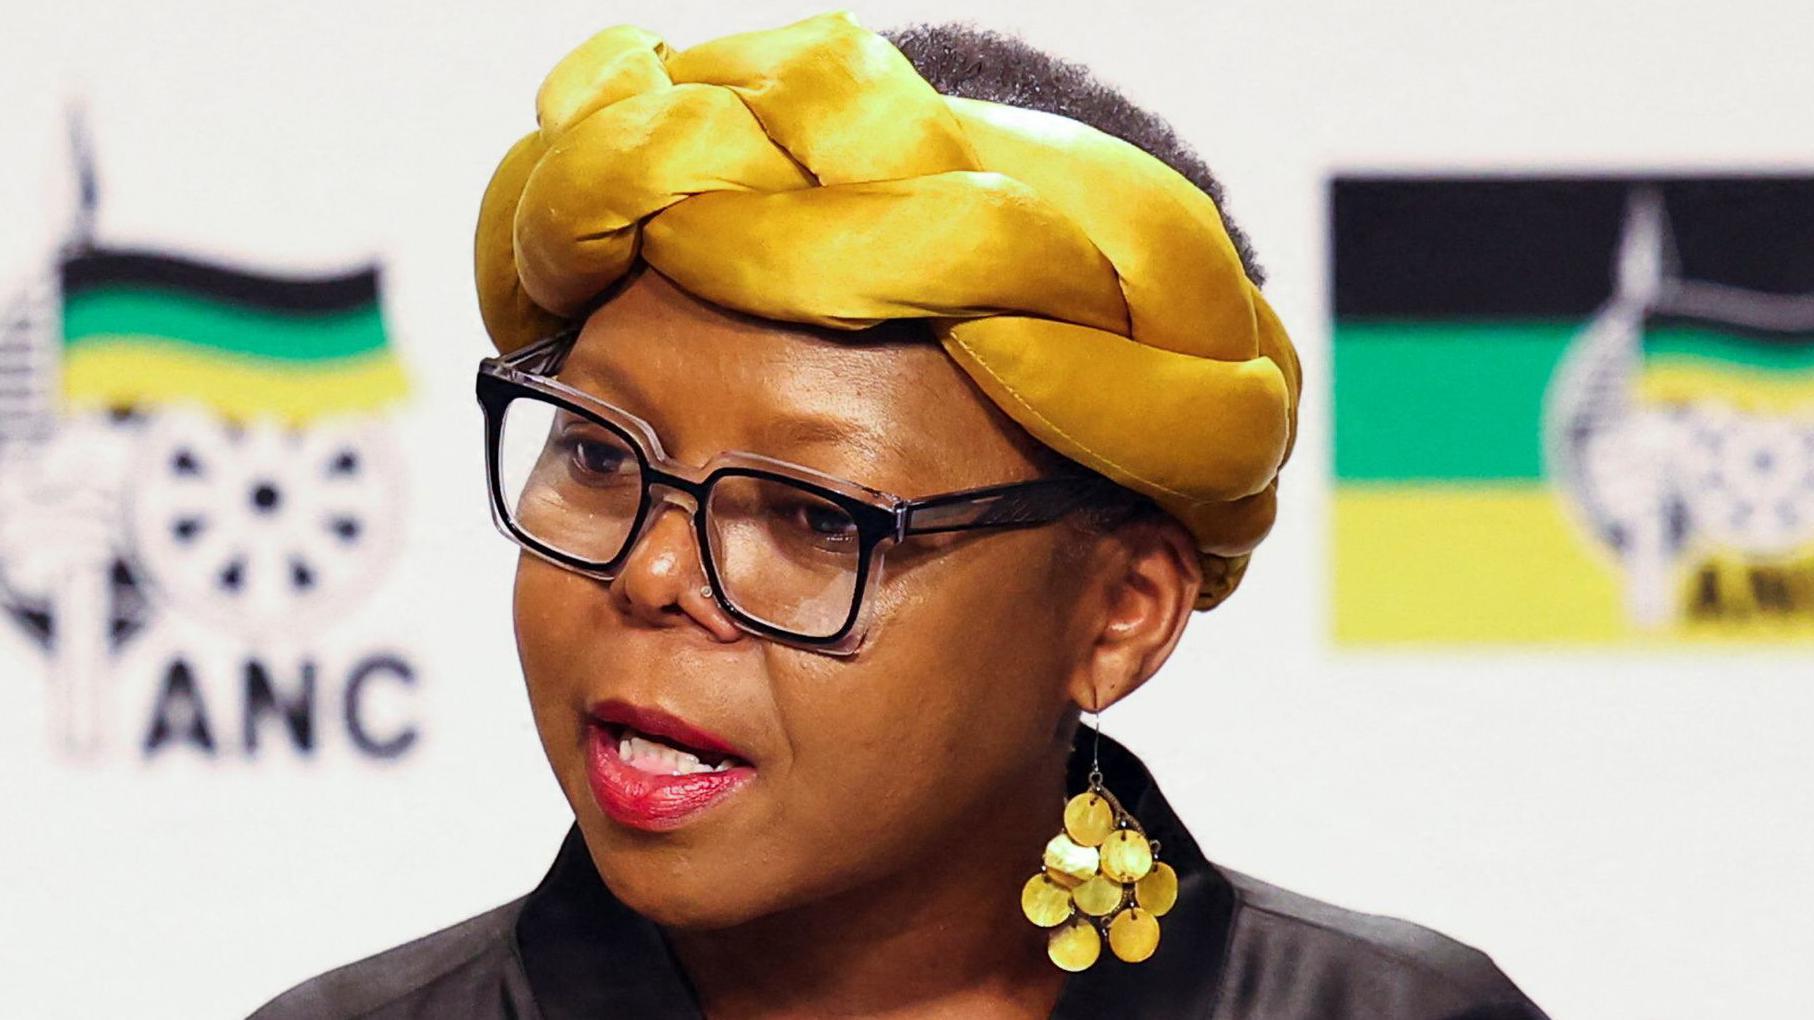 ANC eyes national unity government after election loss